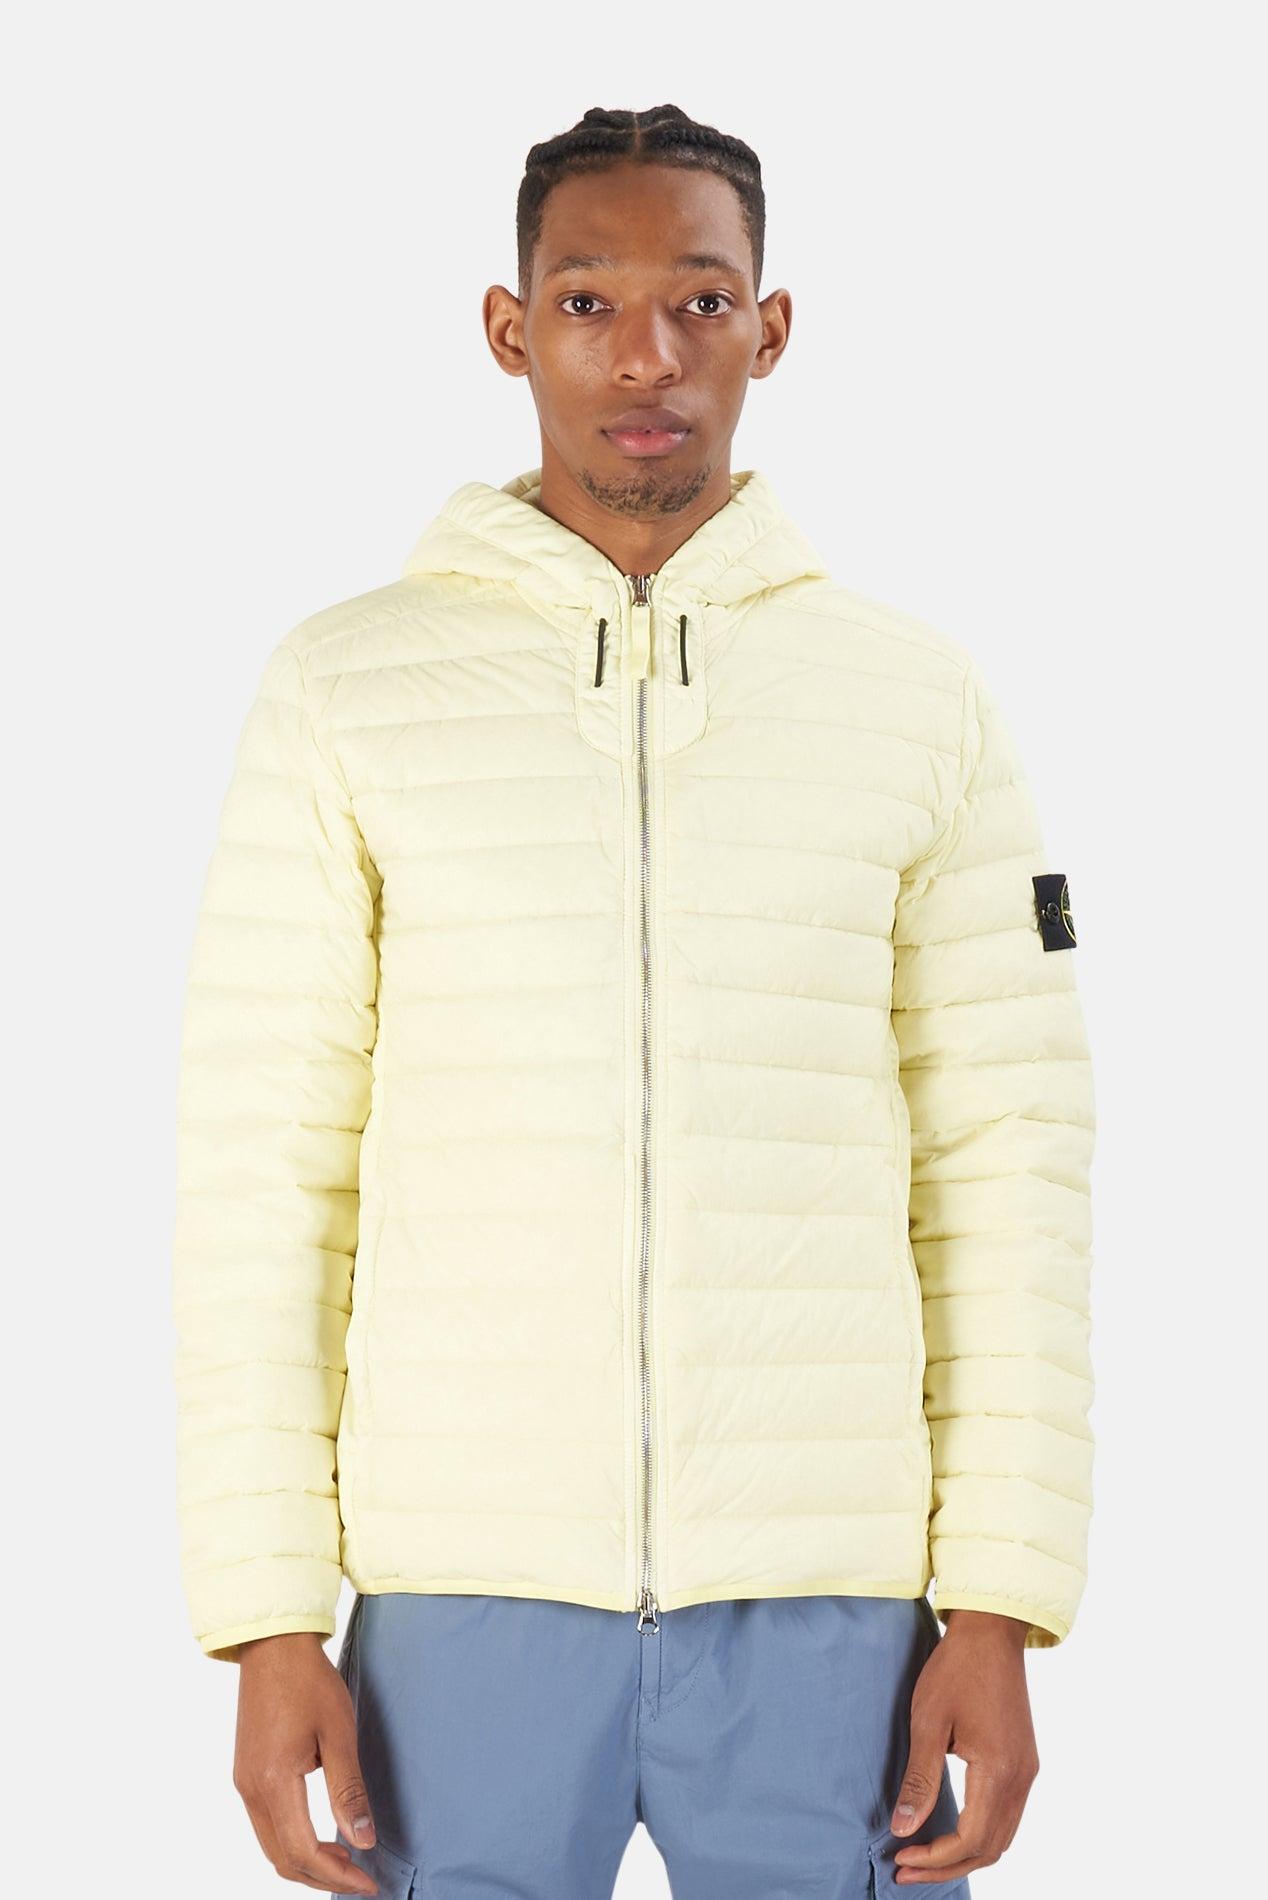 Stone Island Loom Woven Down Jacket in Natural for Men | Lyst